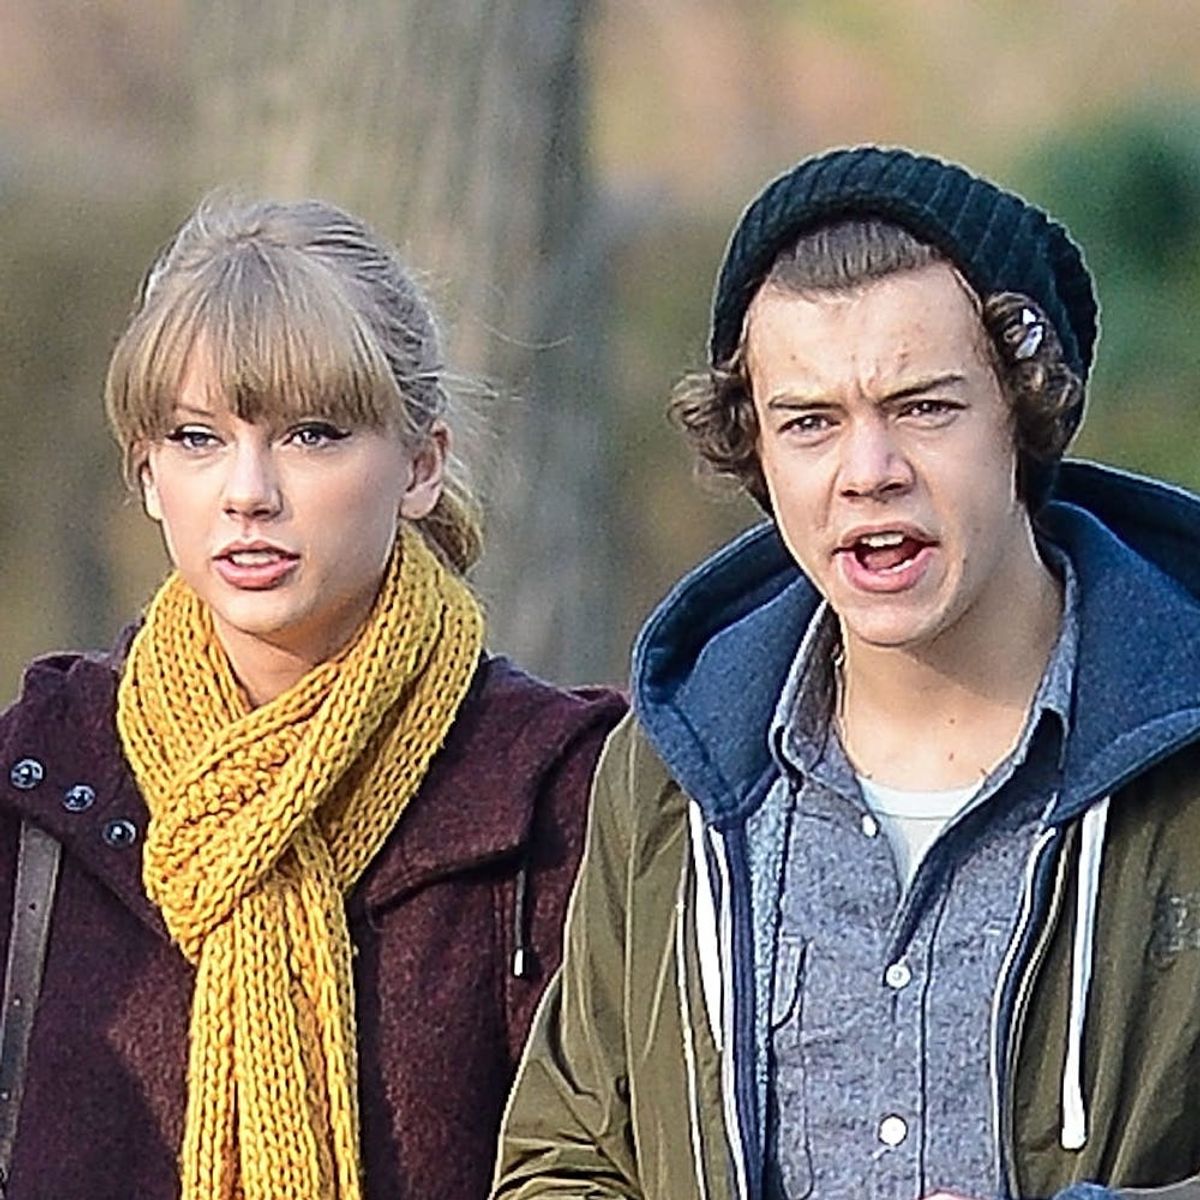 Harry Styles Threw the Most Memorable Twitter Shade of 2016 at Taylor Swift